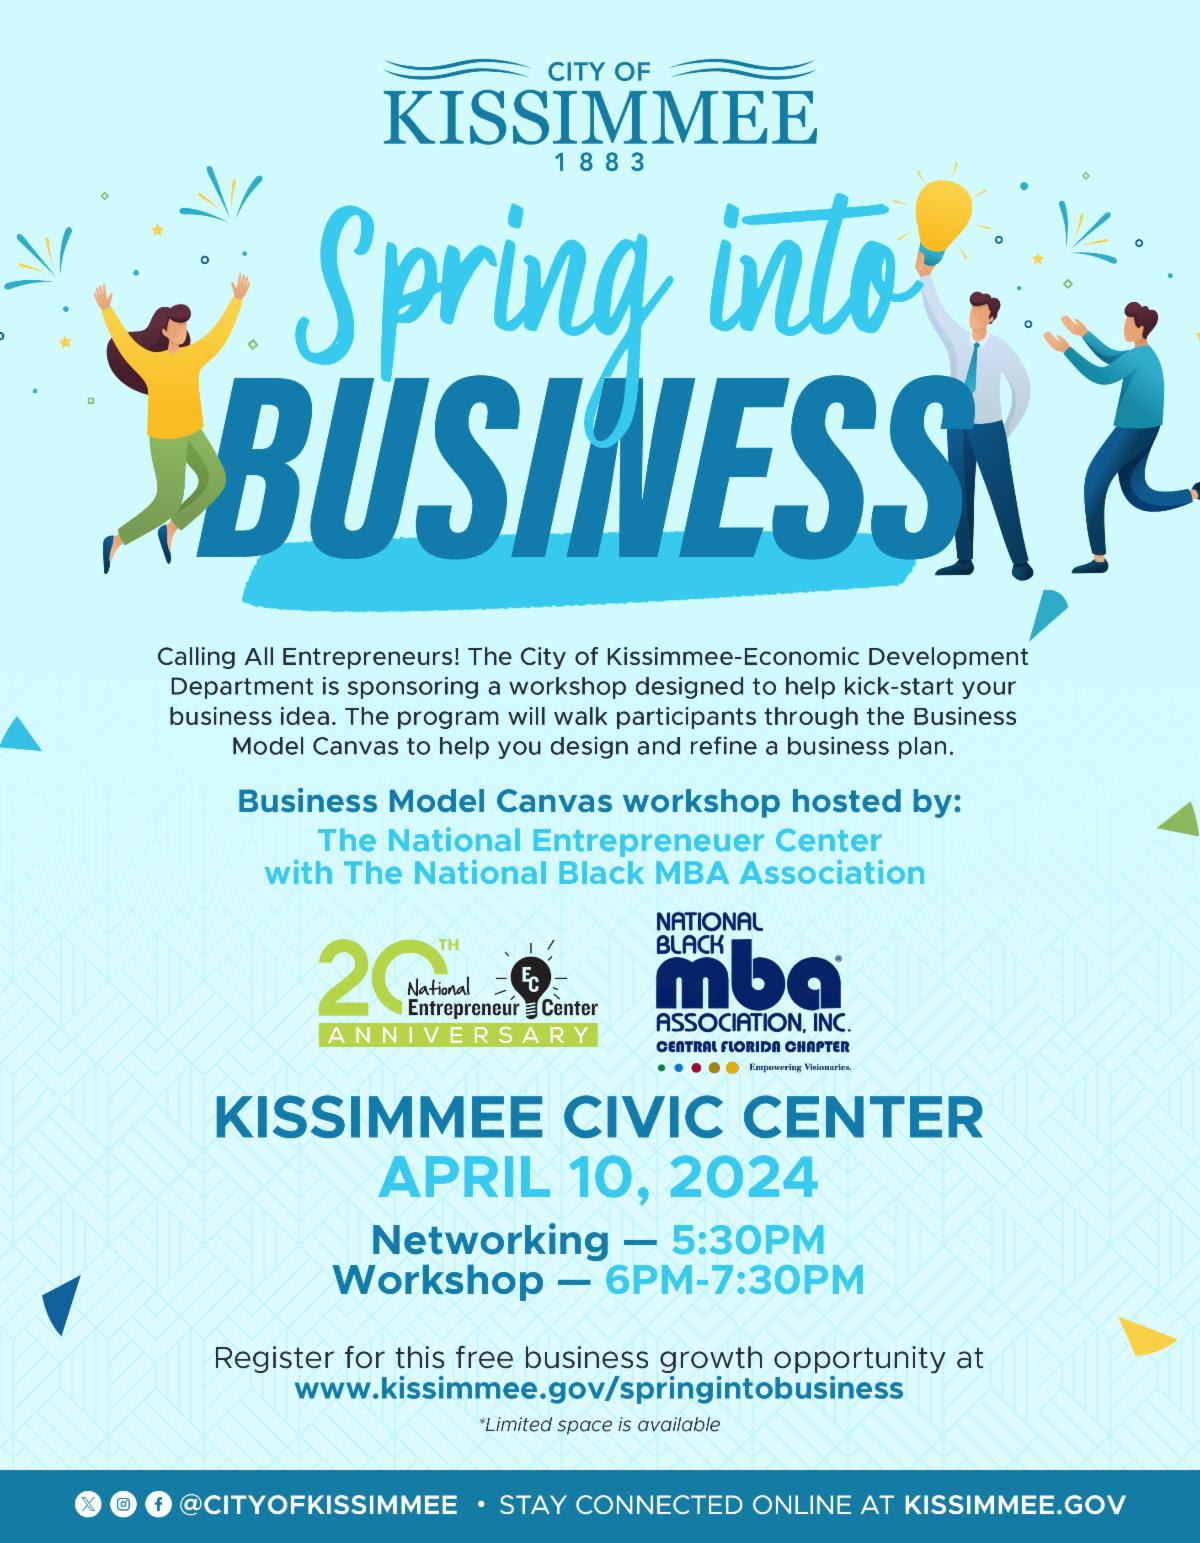 Business Resource Expos in Kissimmee and St. Cloud on April 10 and 12